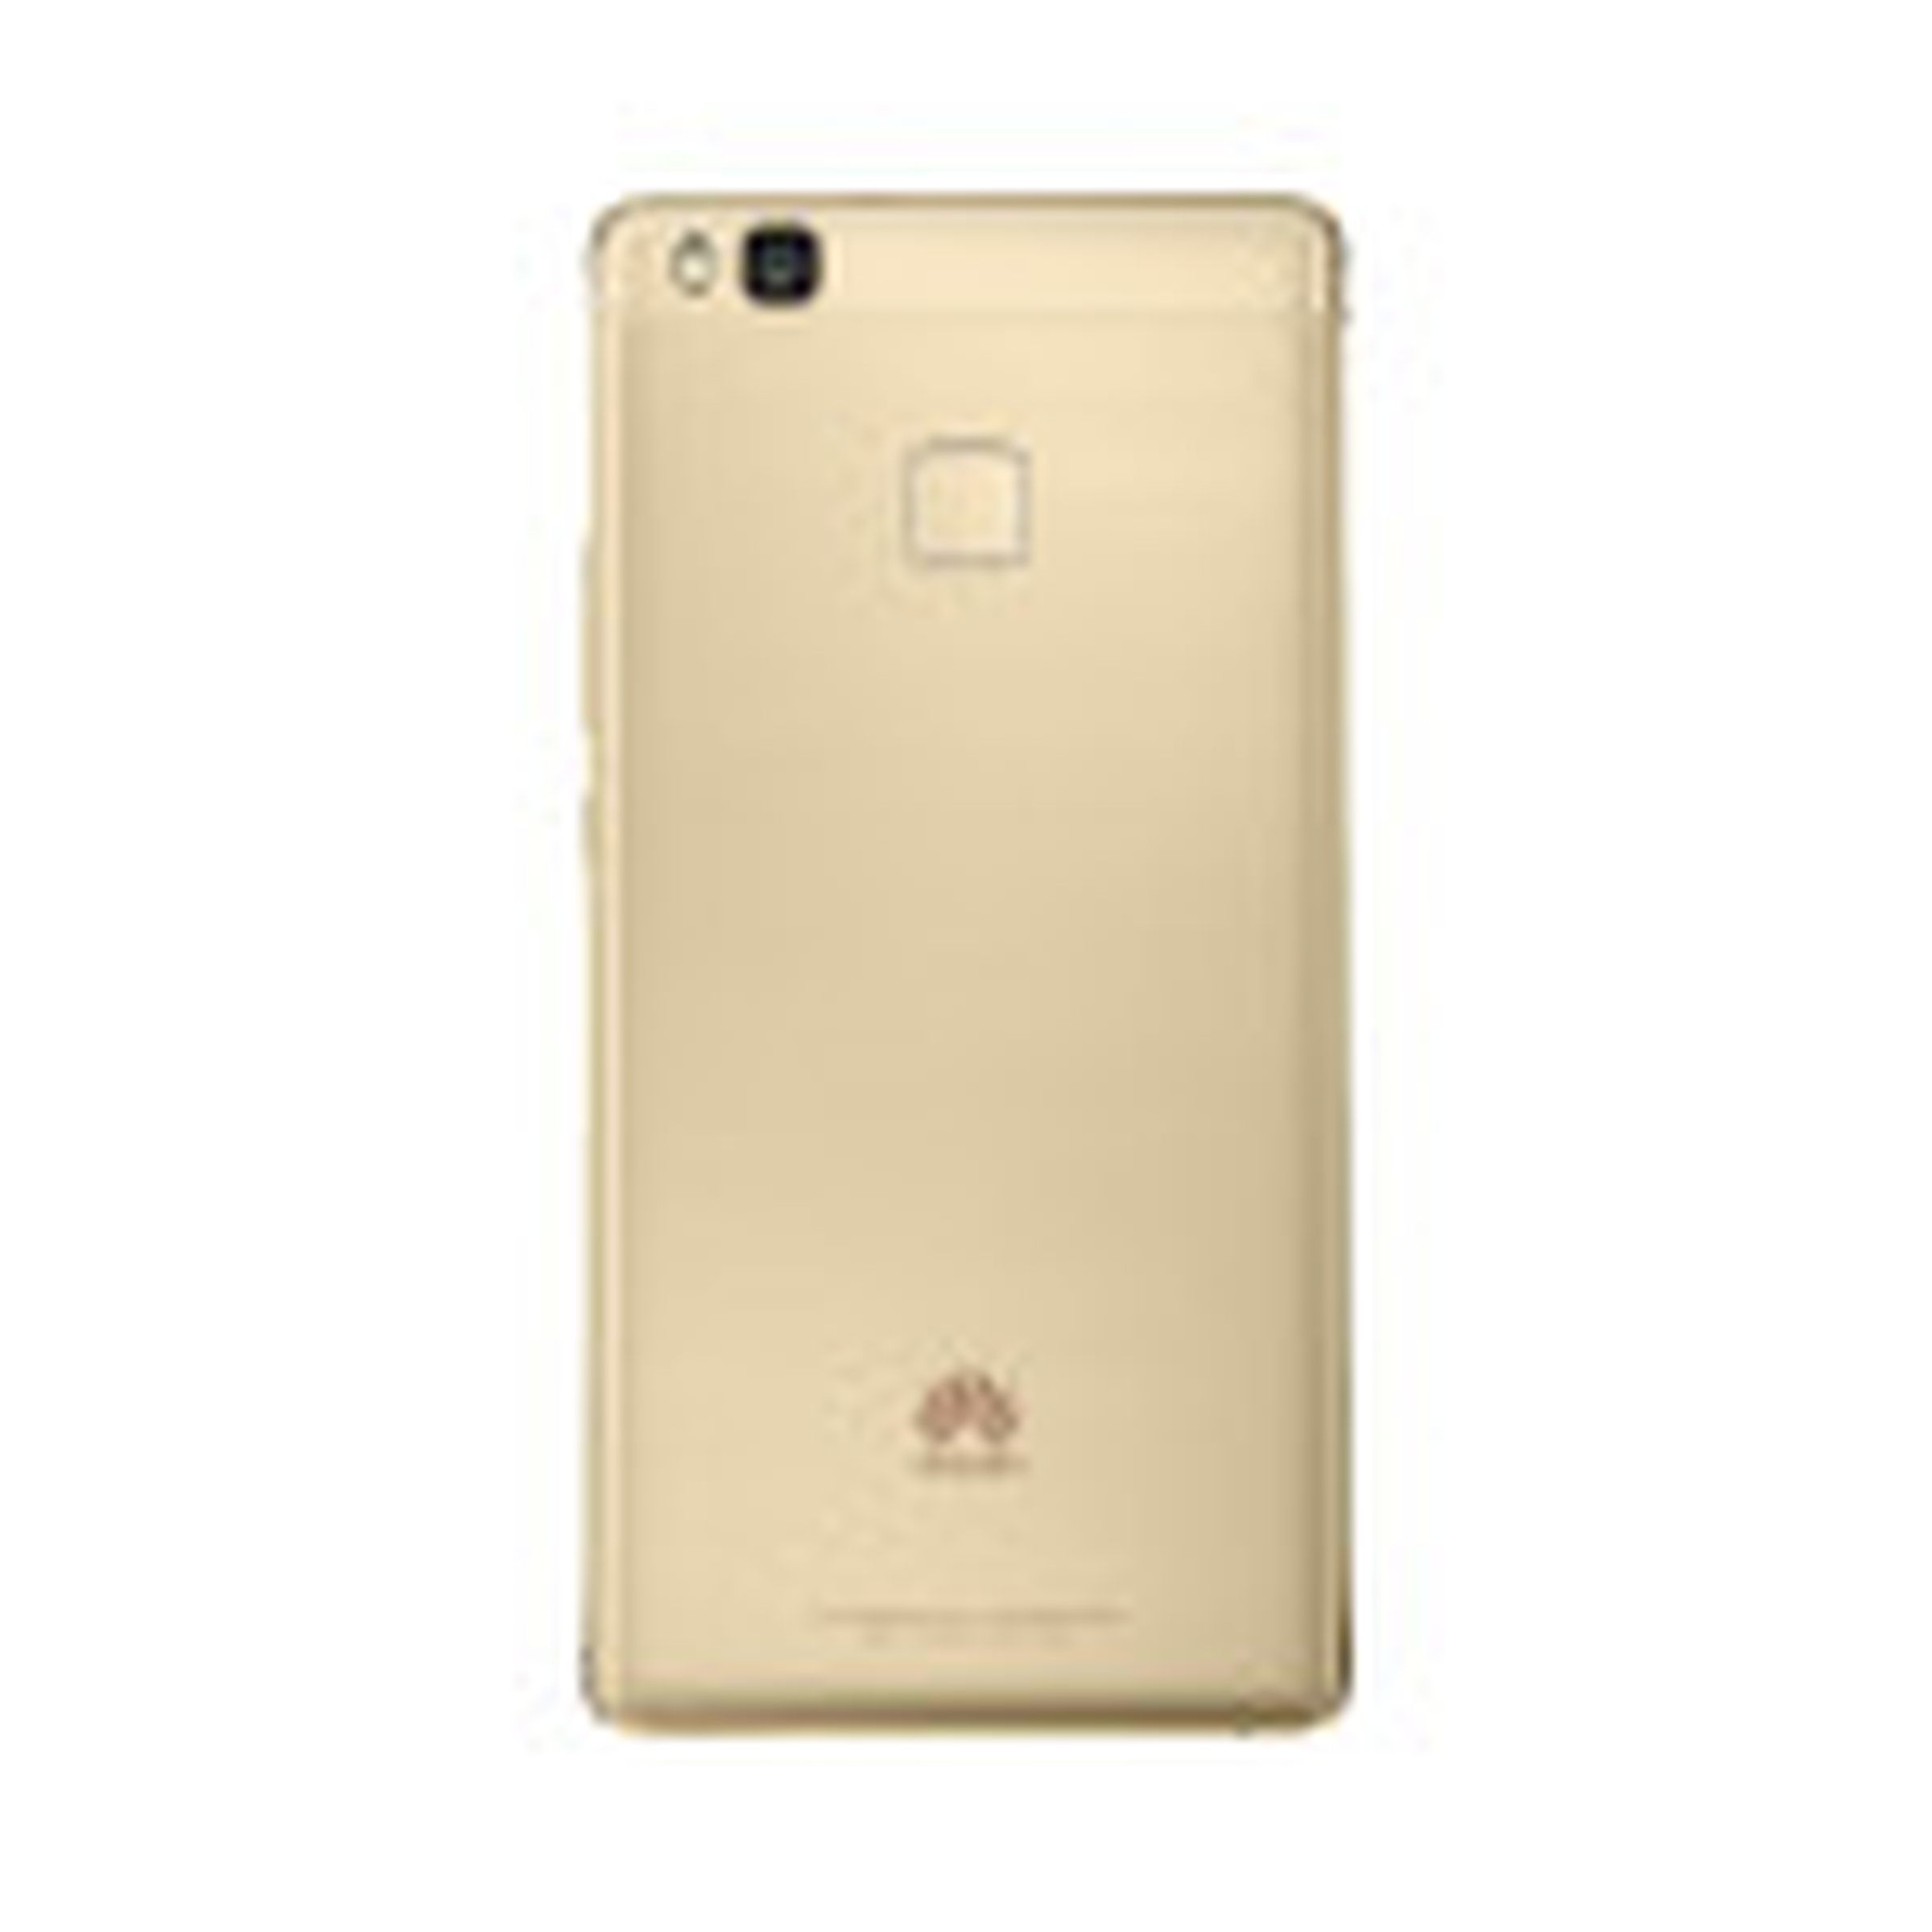 Huawei unveiled its G9 Lite phone